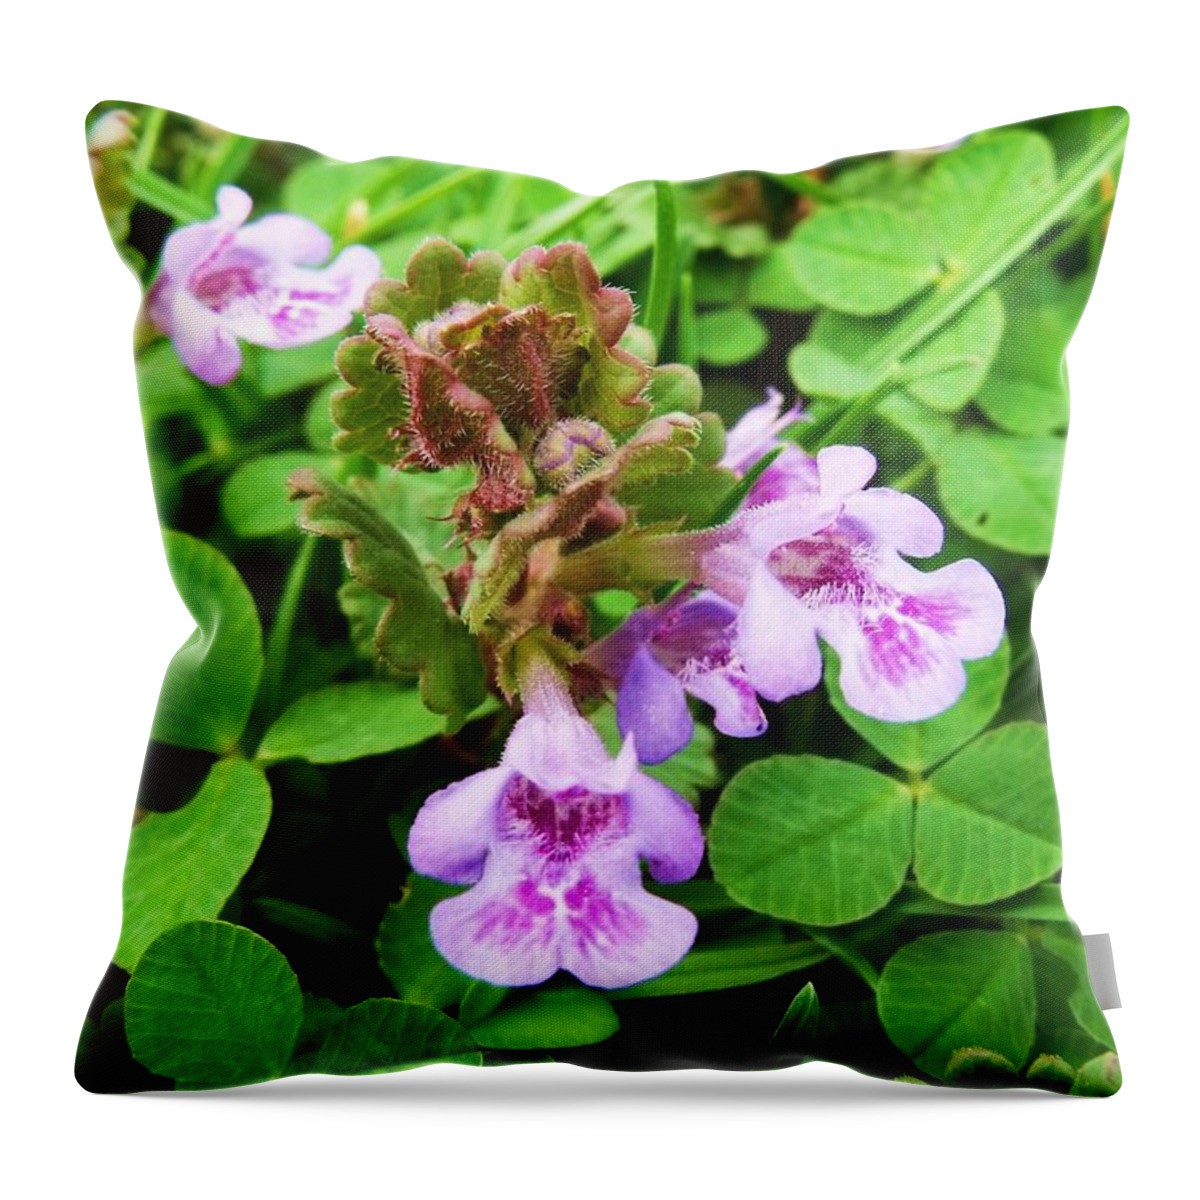 Flowers Throw Pillow featuring the photograph Tiny Flowers I by Anna Villarreal Garbis